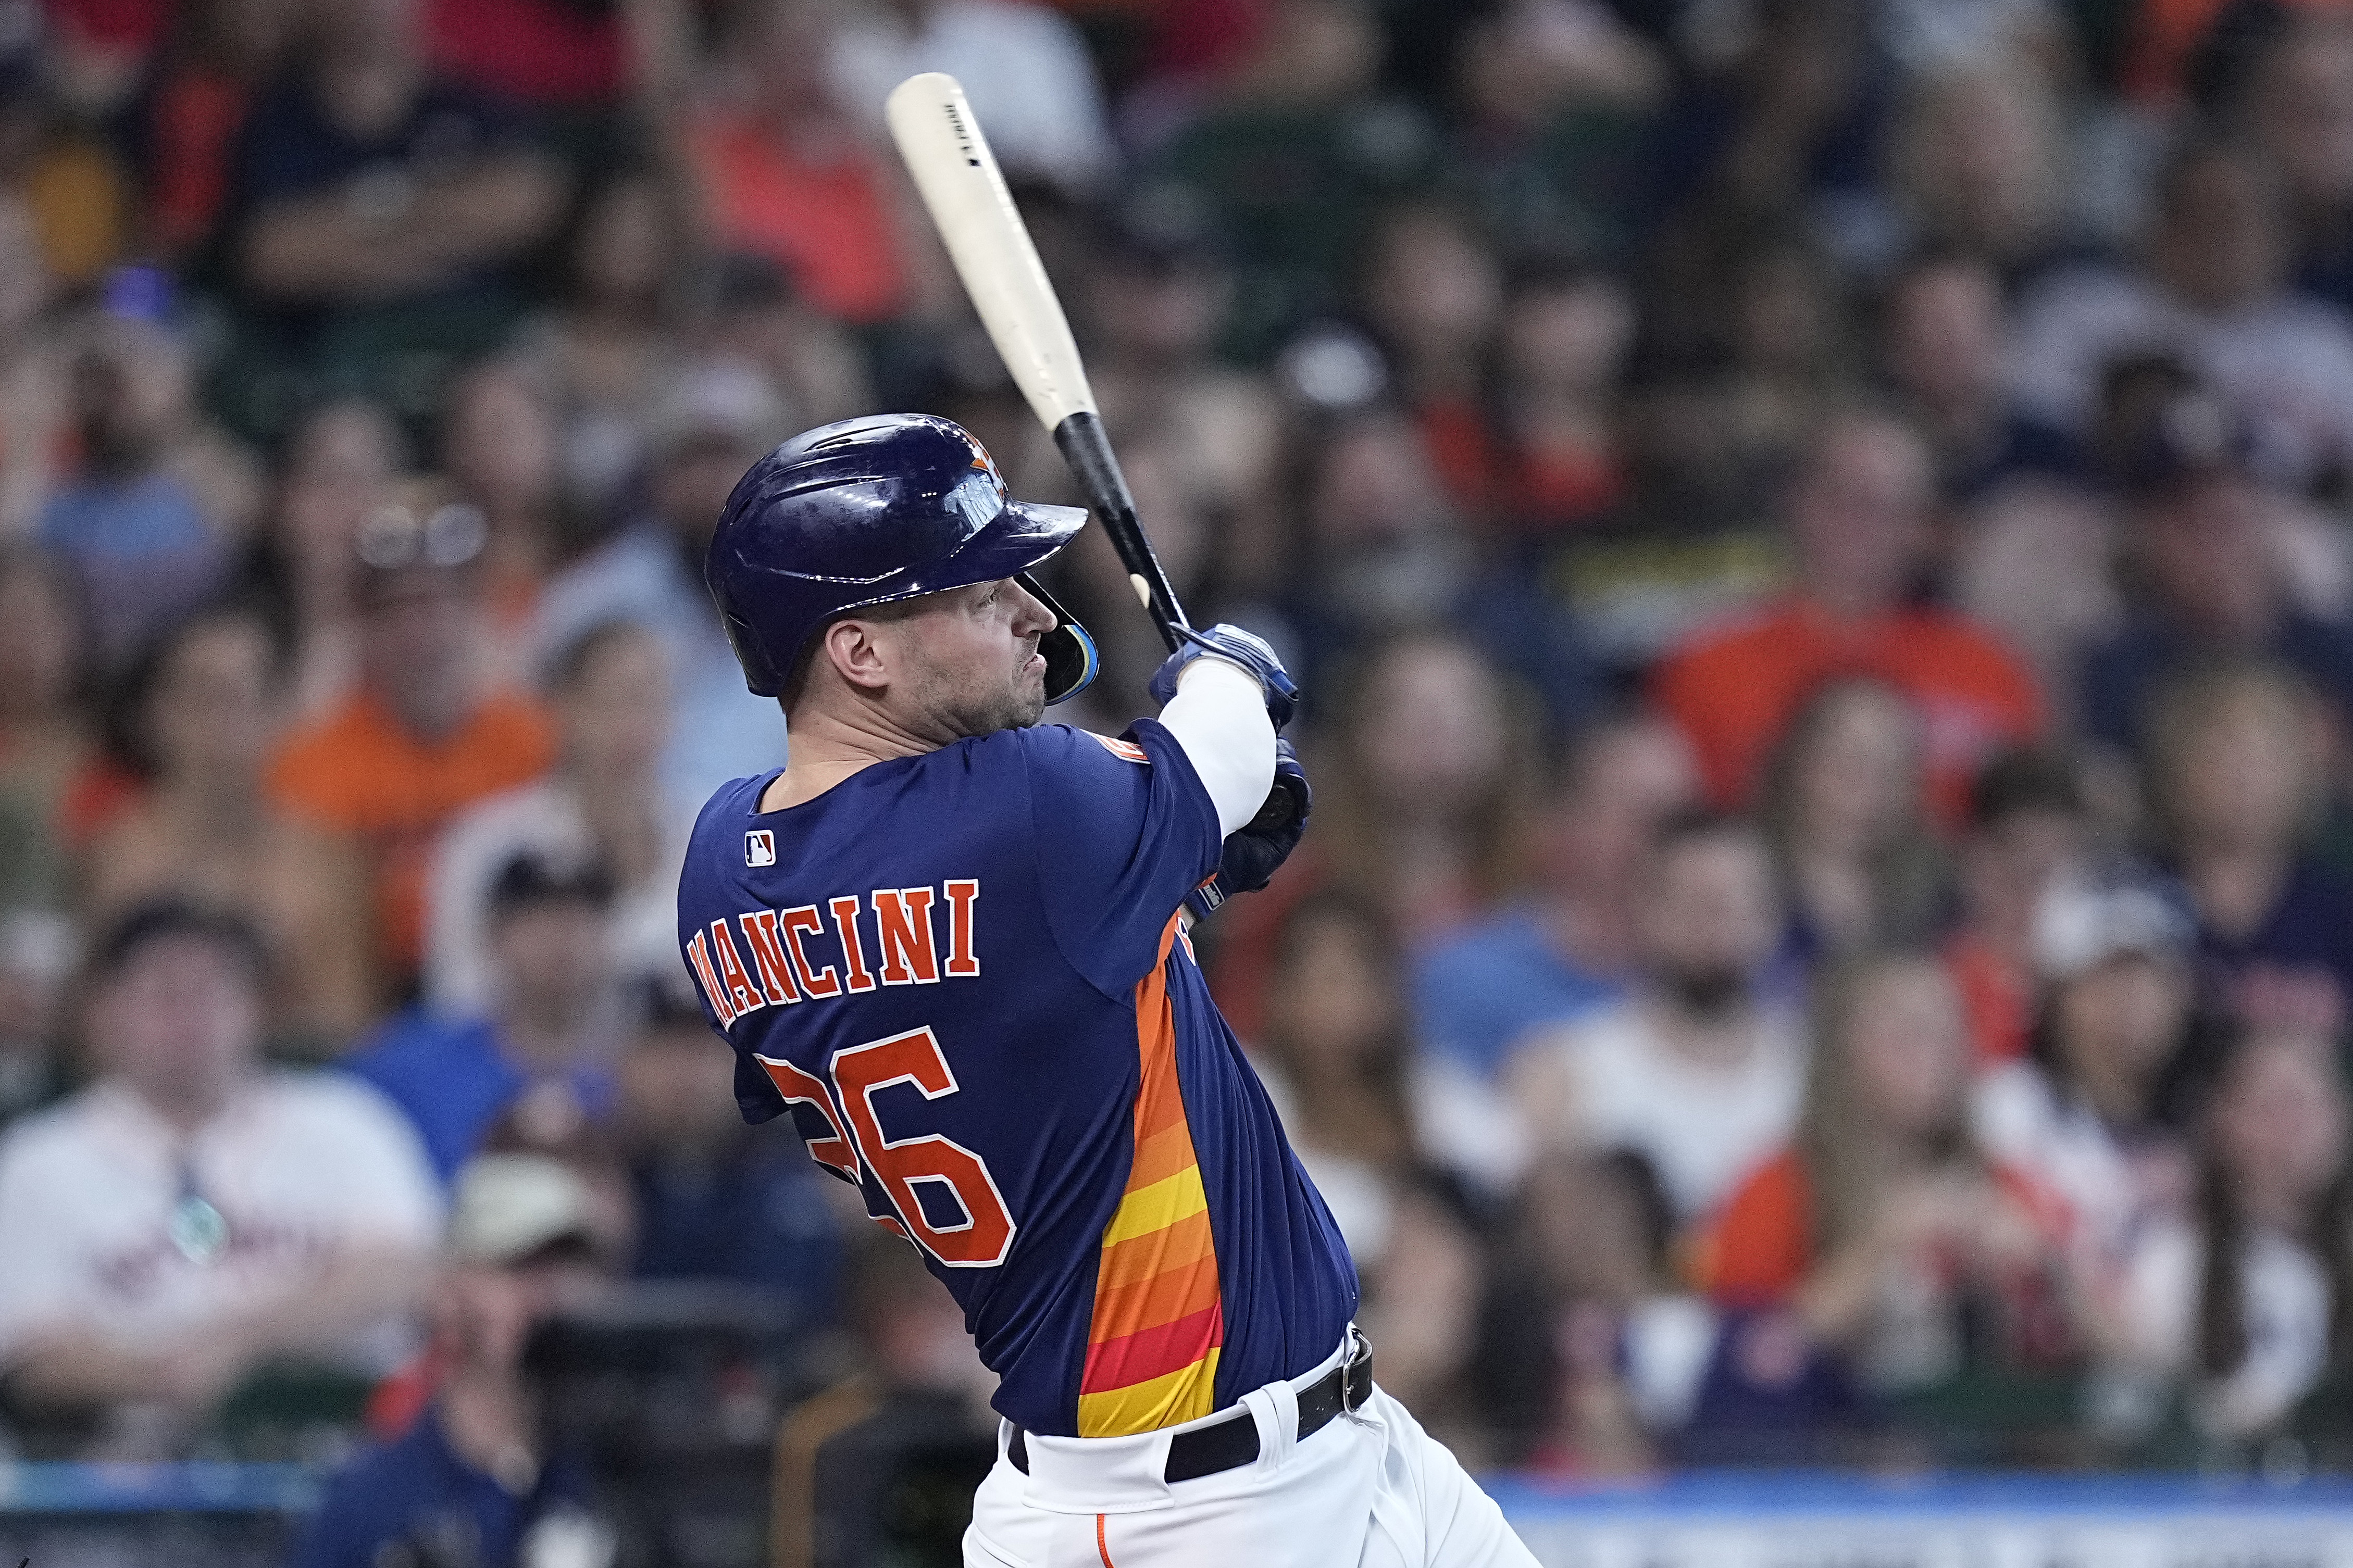 Trey Mancini Led Baseball in RBI One Year After Colon Cancer